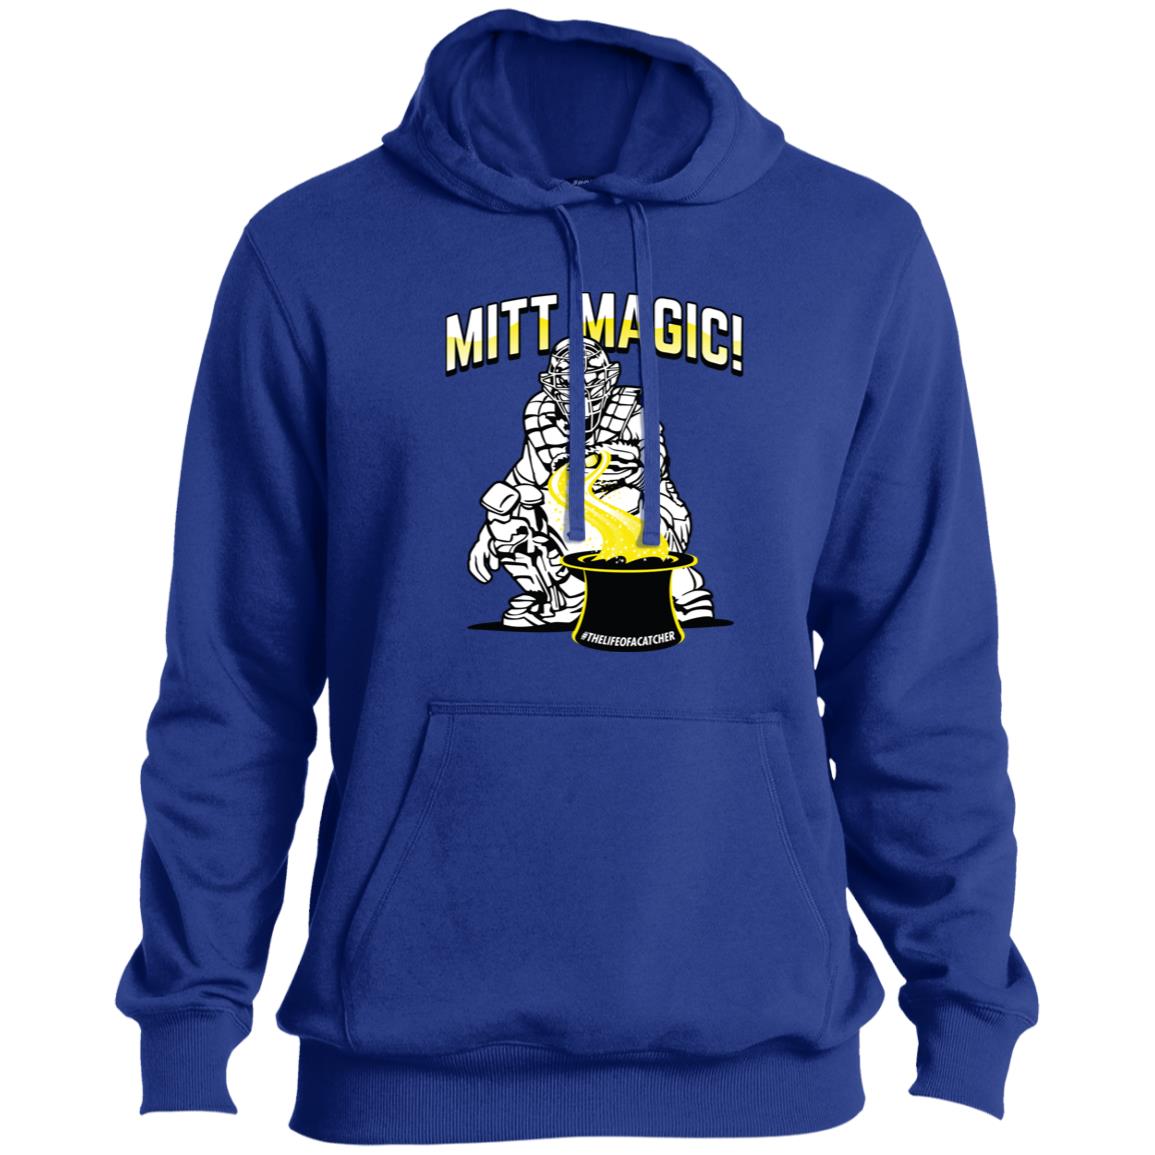 The Catching Guy Mitt Magic Pullover Hoodie blue